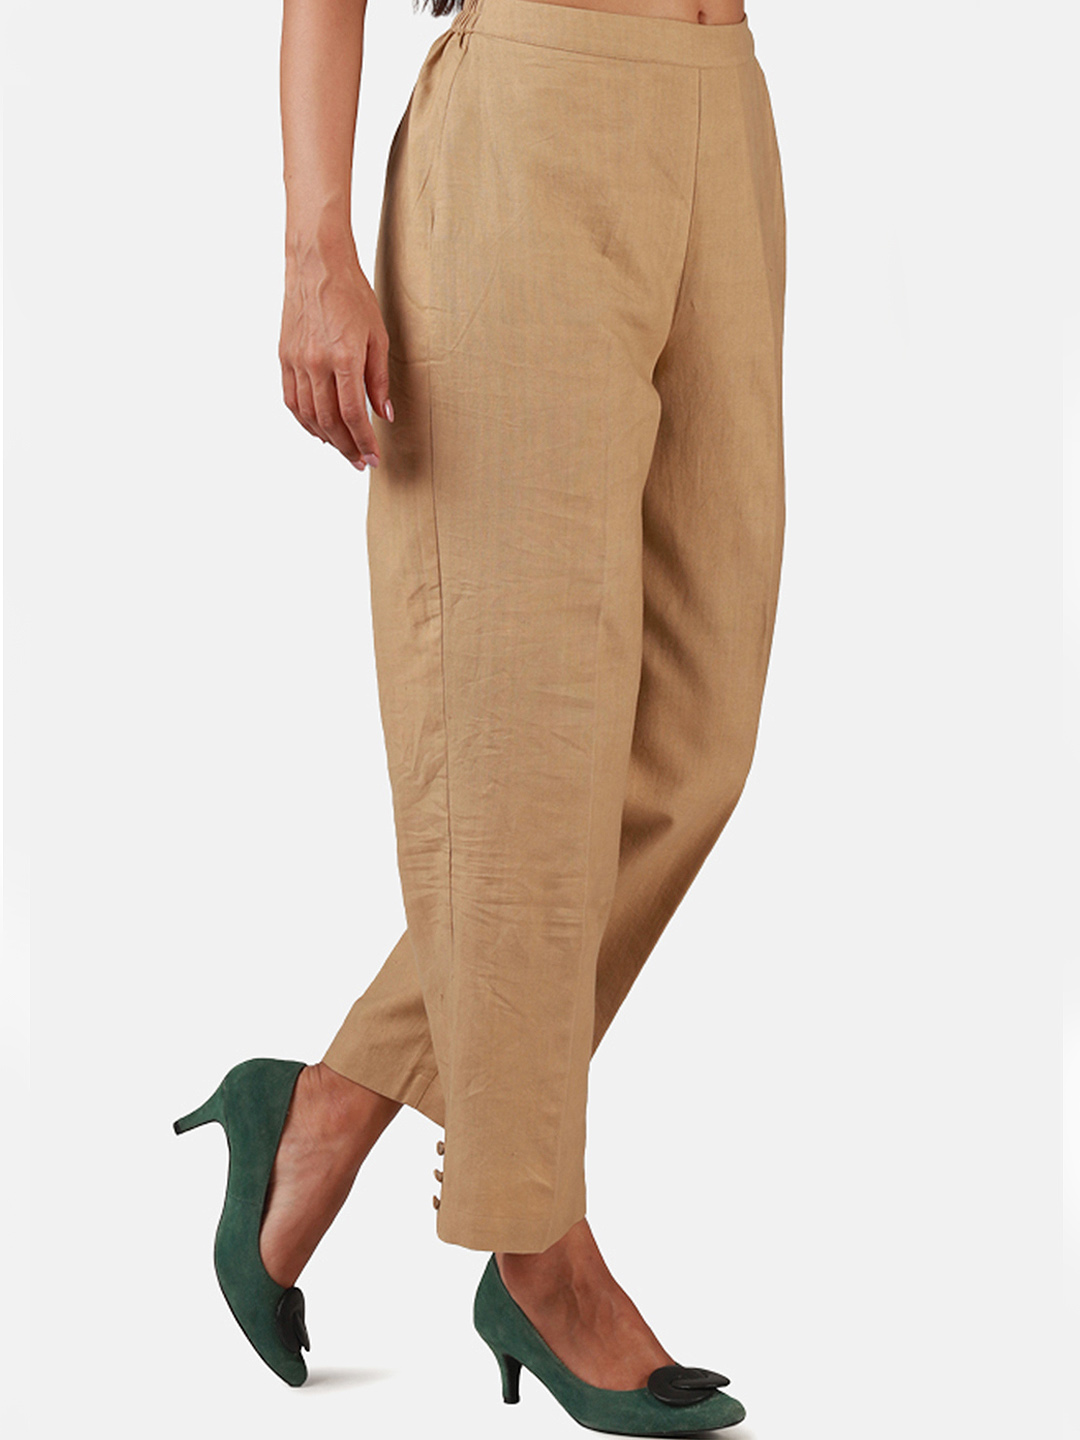 Buy Pink High Rise Striped Pants For Women Online in India | VeroModa